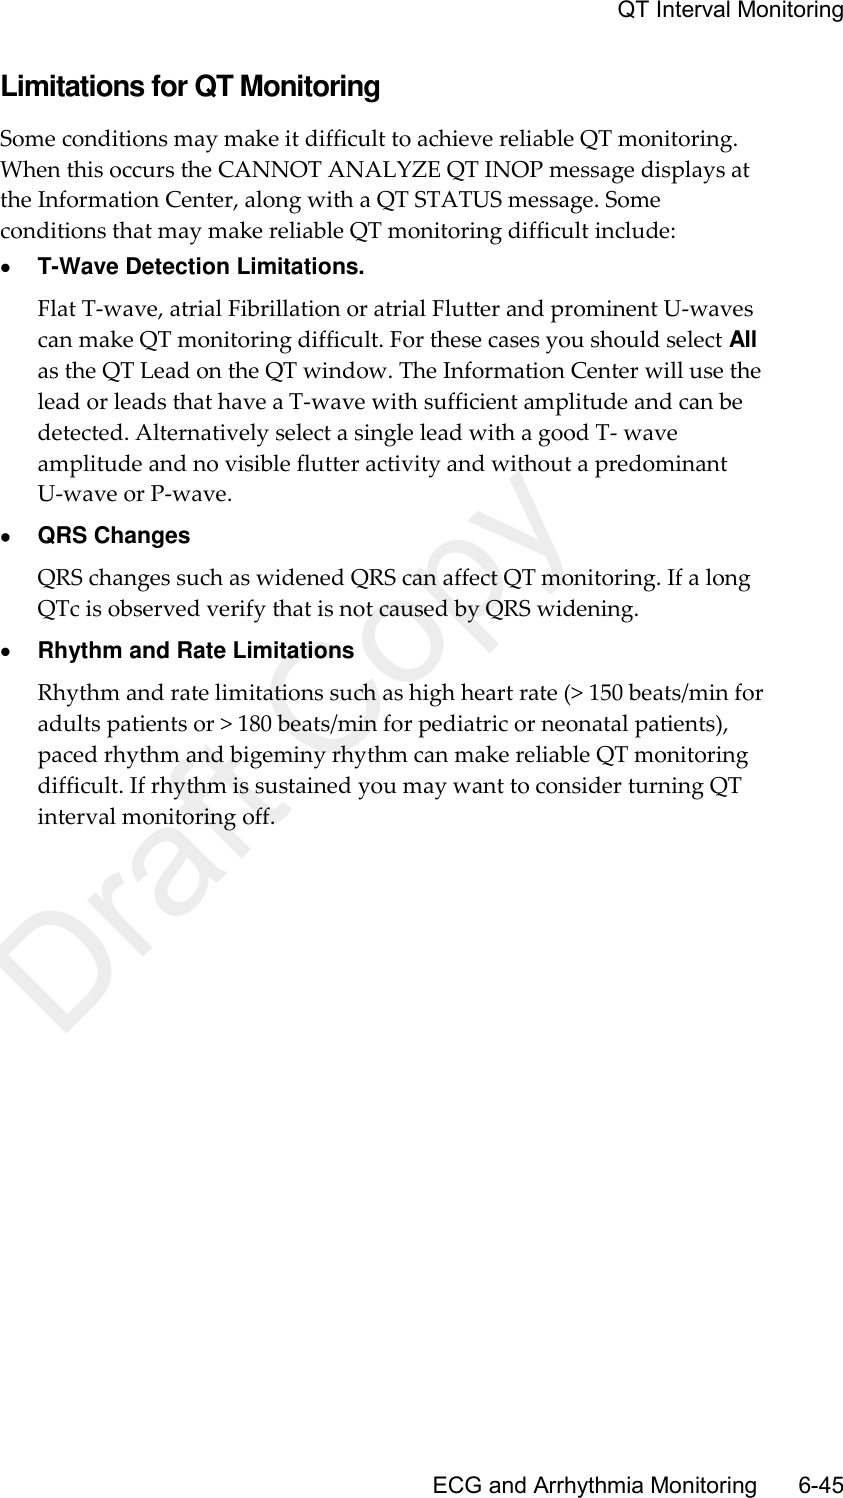     QT Interval Monitoring       ECG and Arrhythmia Monitoring      6-45 Limitations for QT Monitoring Some conditions may make it difficult to achieve reliable QT monitoring. When this occurs the CANNOT ANALYZE QT INOP message displays at the Information Center, along with a QT STATUS message. Some conditions that may make reliable QT monitoring difficult include:  T-Wave Detection Limitations. Flat T-wave, atrial Fibrillation or atrial Flutter and prominent U-waves can make QT monitoring difficult. For these cases you should select All as the QT Lead on the QT window. The Information Center will use the lead or leads that have a T-wave with sufficient amplitude and can be detected. Alternatively select a single lead with a good T- wave amplitude and no visible flutter activity and without a predominant U-wave or P-wave.  QRS Changes QRS changes such as widened QRS can affect QT monitoring. If a long QTc is observed verify that is not caused by QRS widening.  Rhythm and Rate Limitations Rhythm and rate limitations such as high heart rate (&gt; 150 beats/min for adults patients or &gt; 180 beats/min for pediatric or neonatal patients), paced rhythm and bigeminy rhythm can make reliable QT monitoring difficult. If rhythm is sustained you may want to consider turning QT interval monitoring off.  Draft Copy